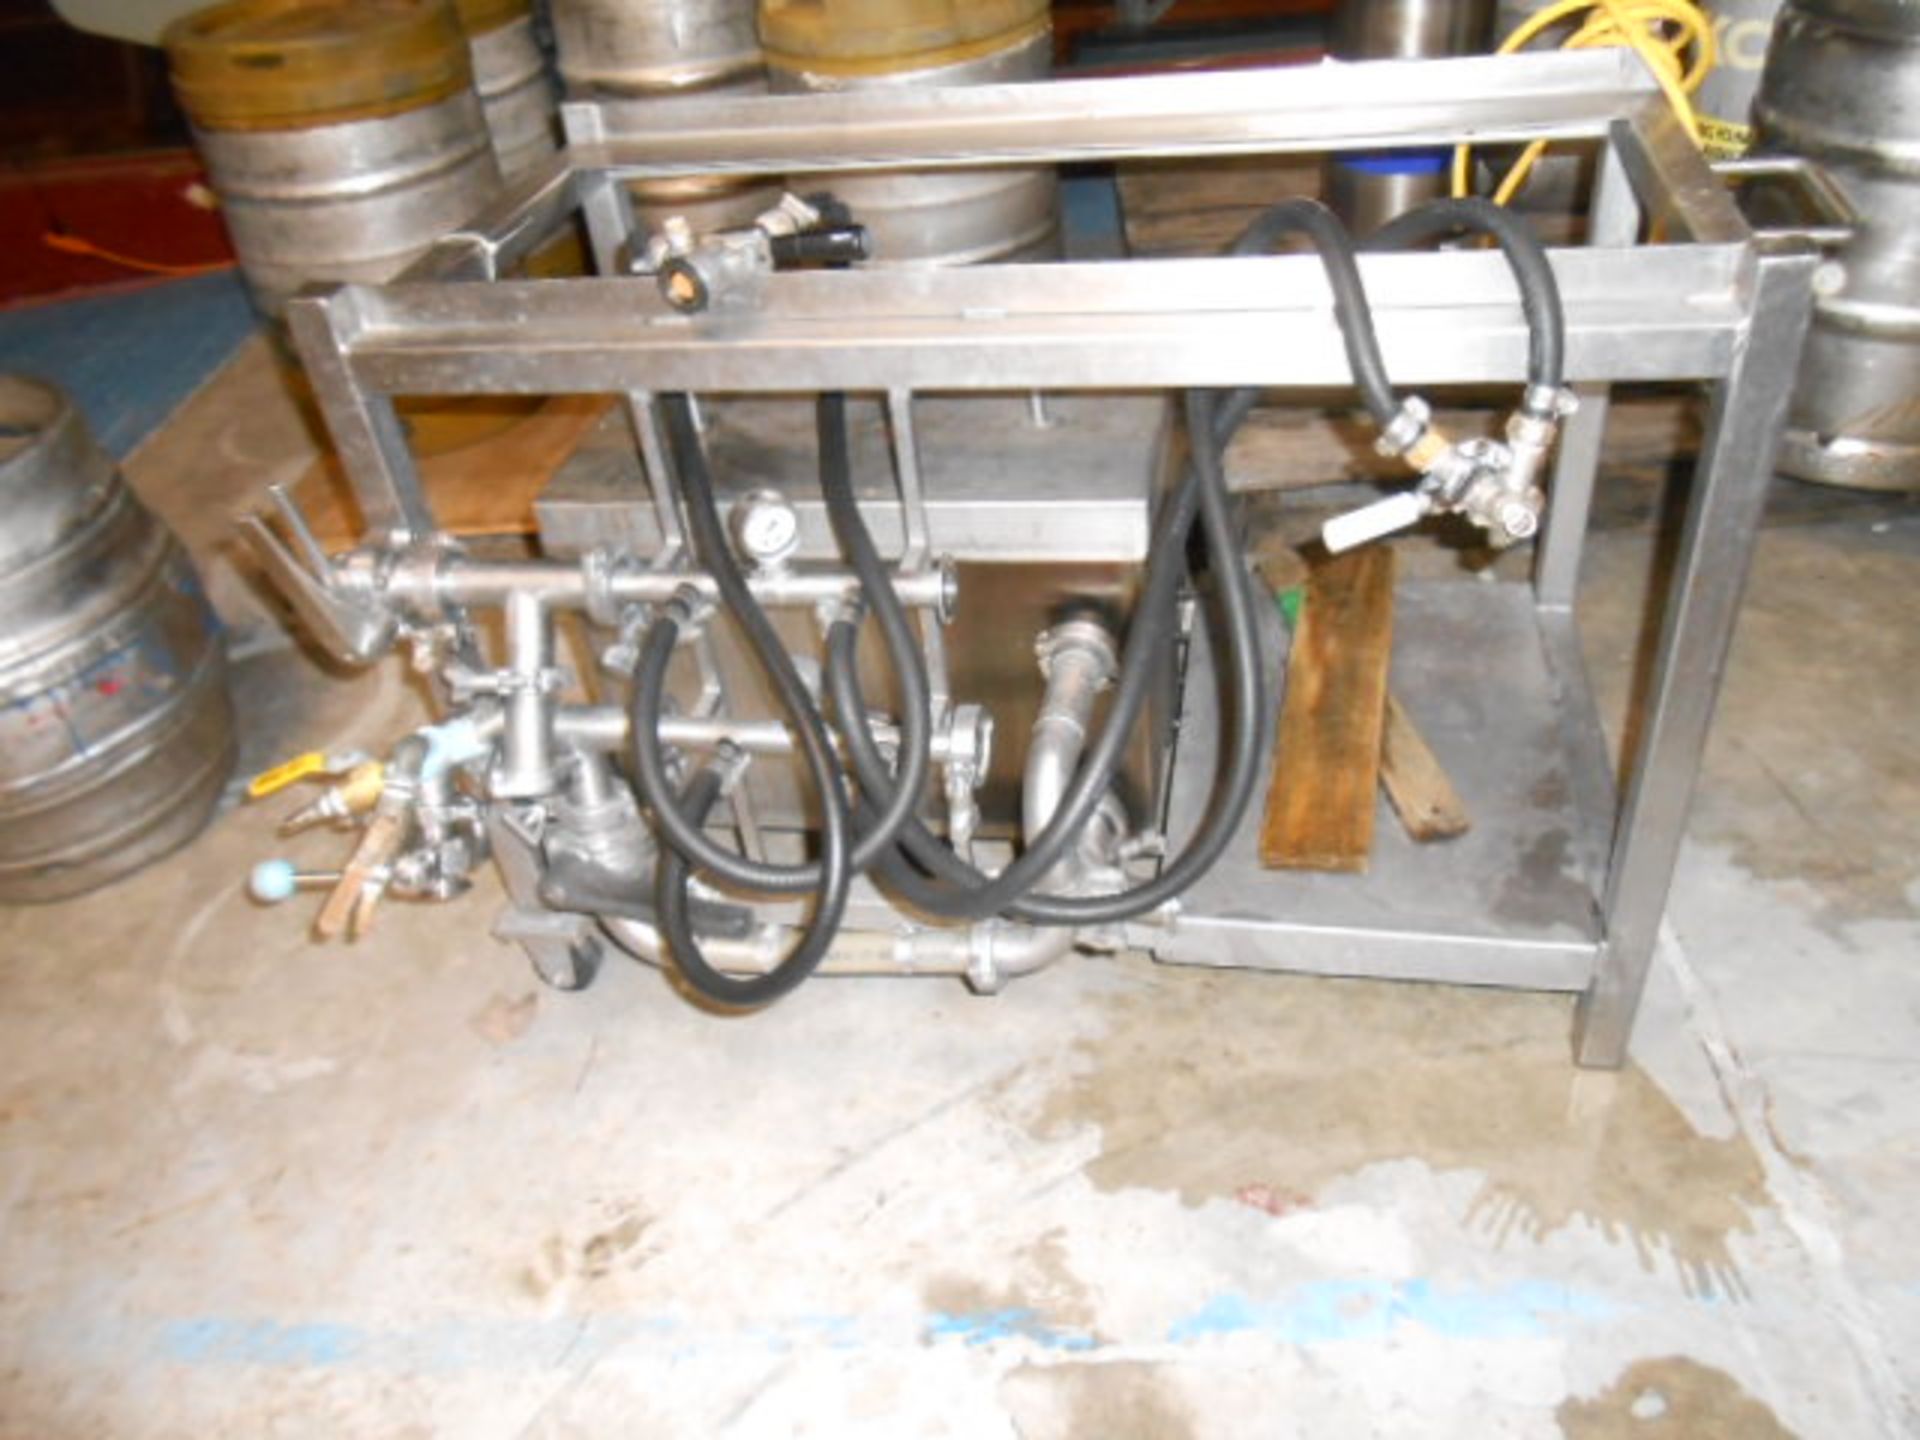 2 station keg washer with 20 in x 16 in x 20 deep tank, Sanke connections, REQUIRES PLANT - Image 3 of 3